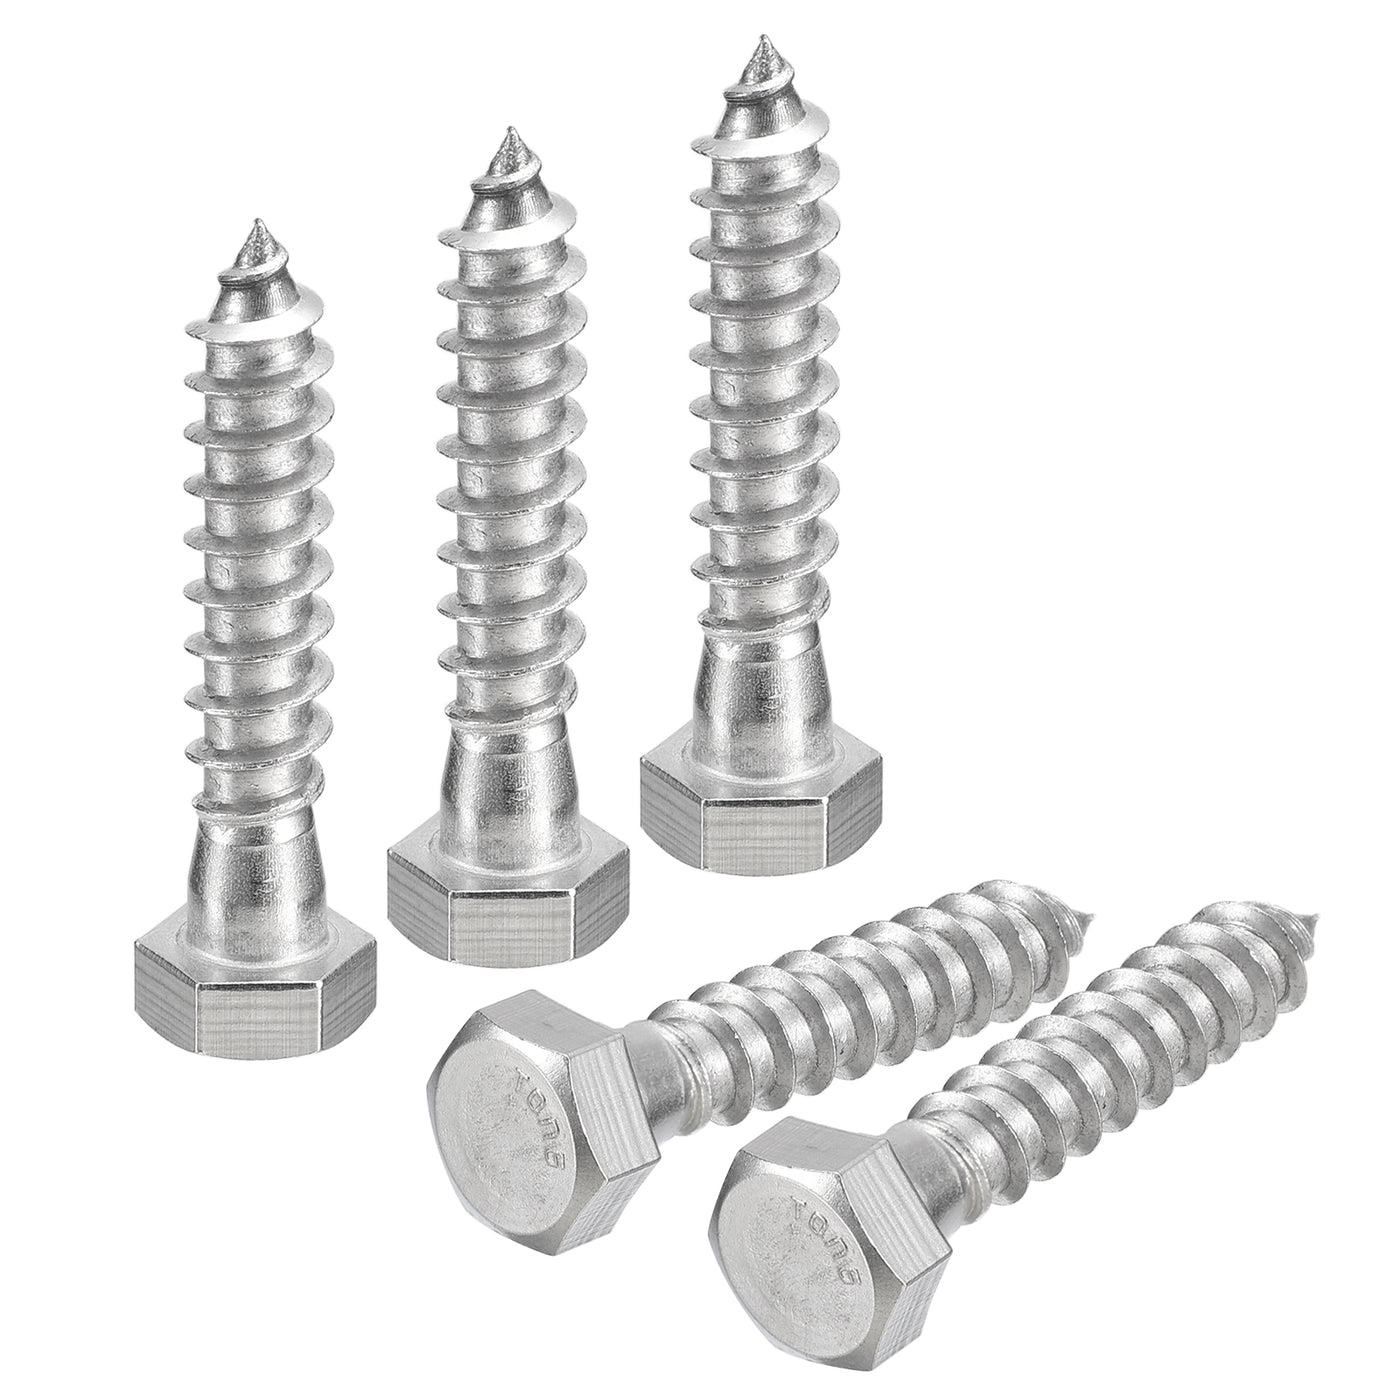 uxcell Uxcell Hex Head Lag Screws Bolts, 5pcs 3/8" x 2" 304 Stainless Steel Wood Screws